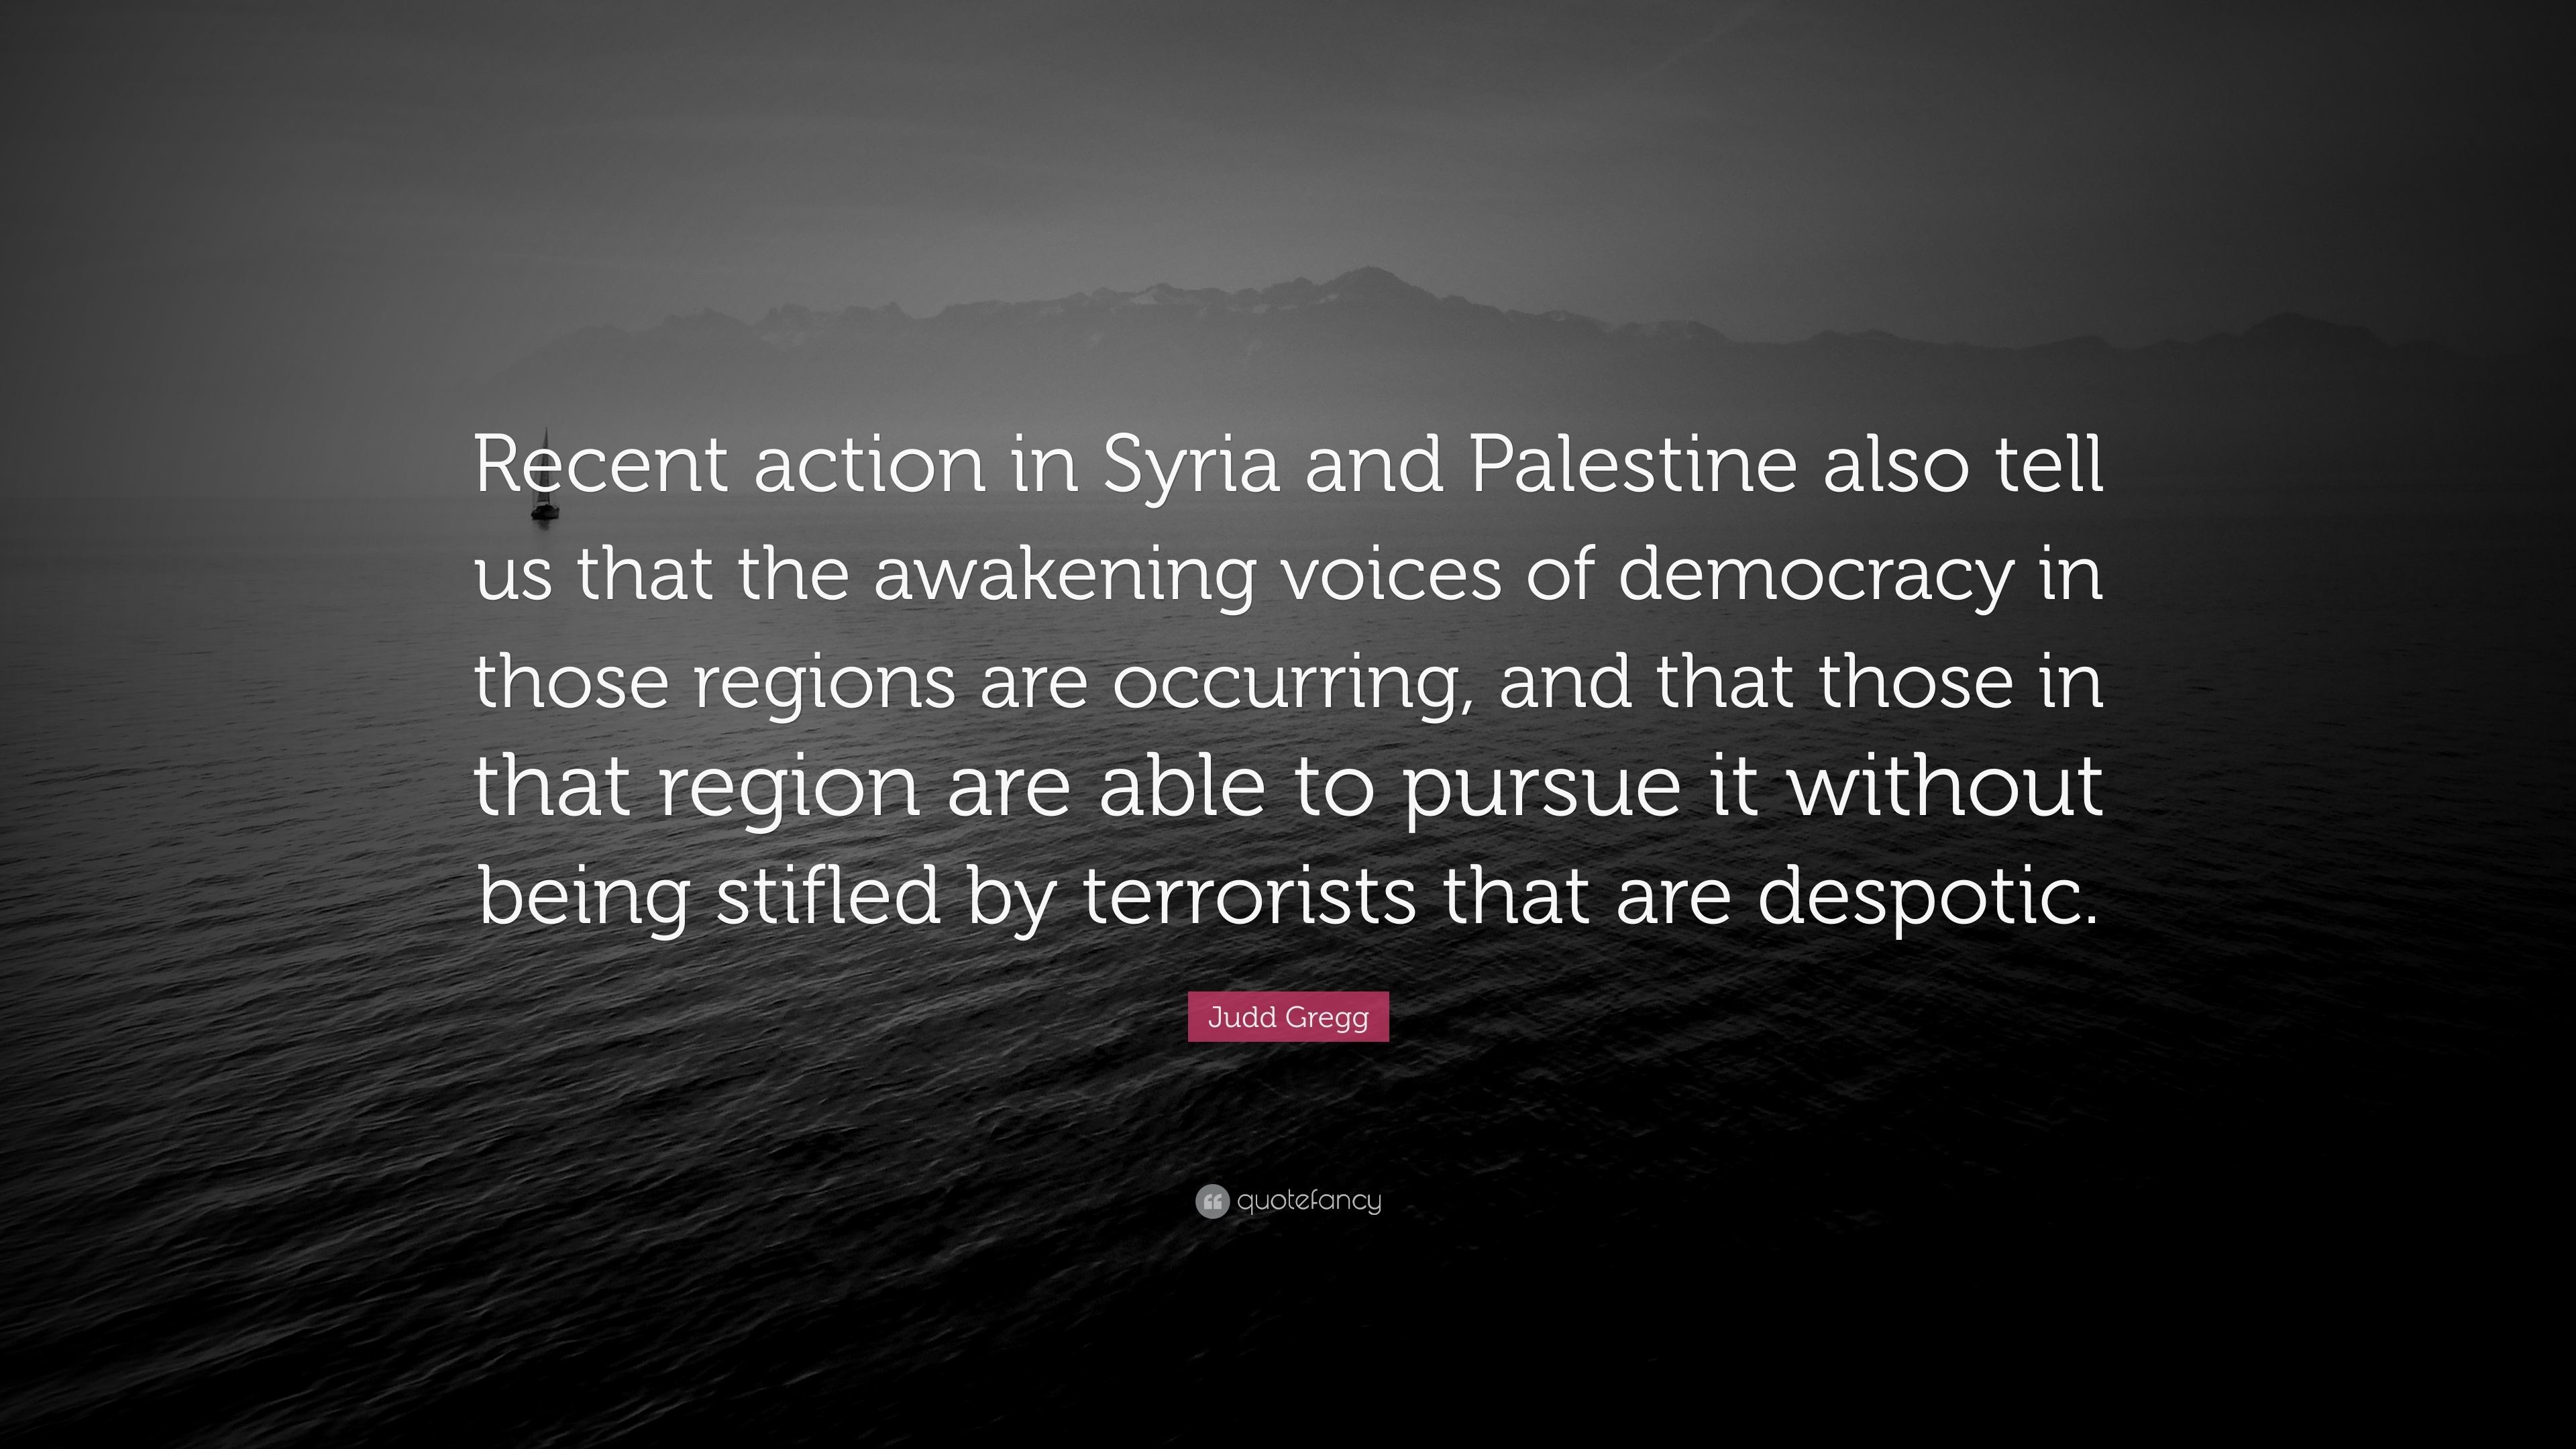 3840x2160 Judd Gregg Quote: “Recent action in Syria and Palestine also tell us that  the